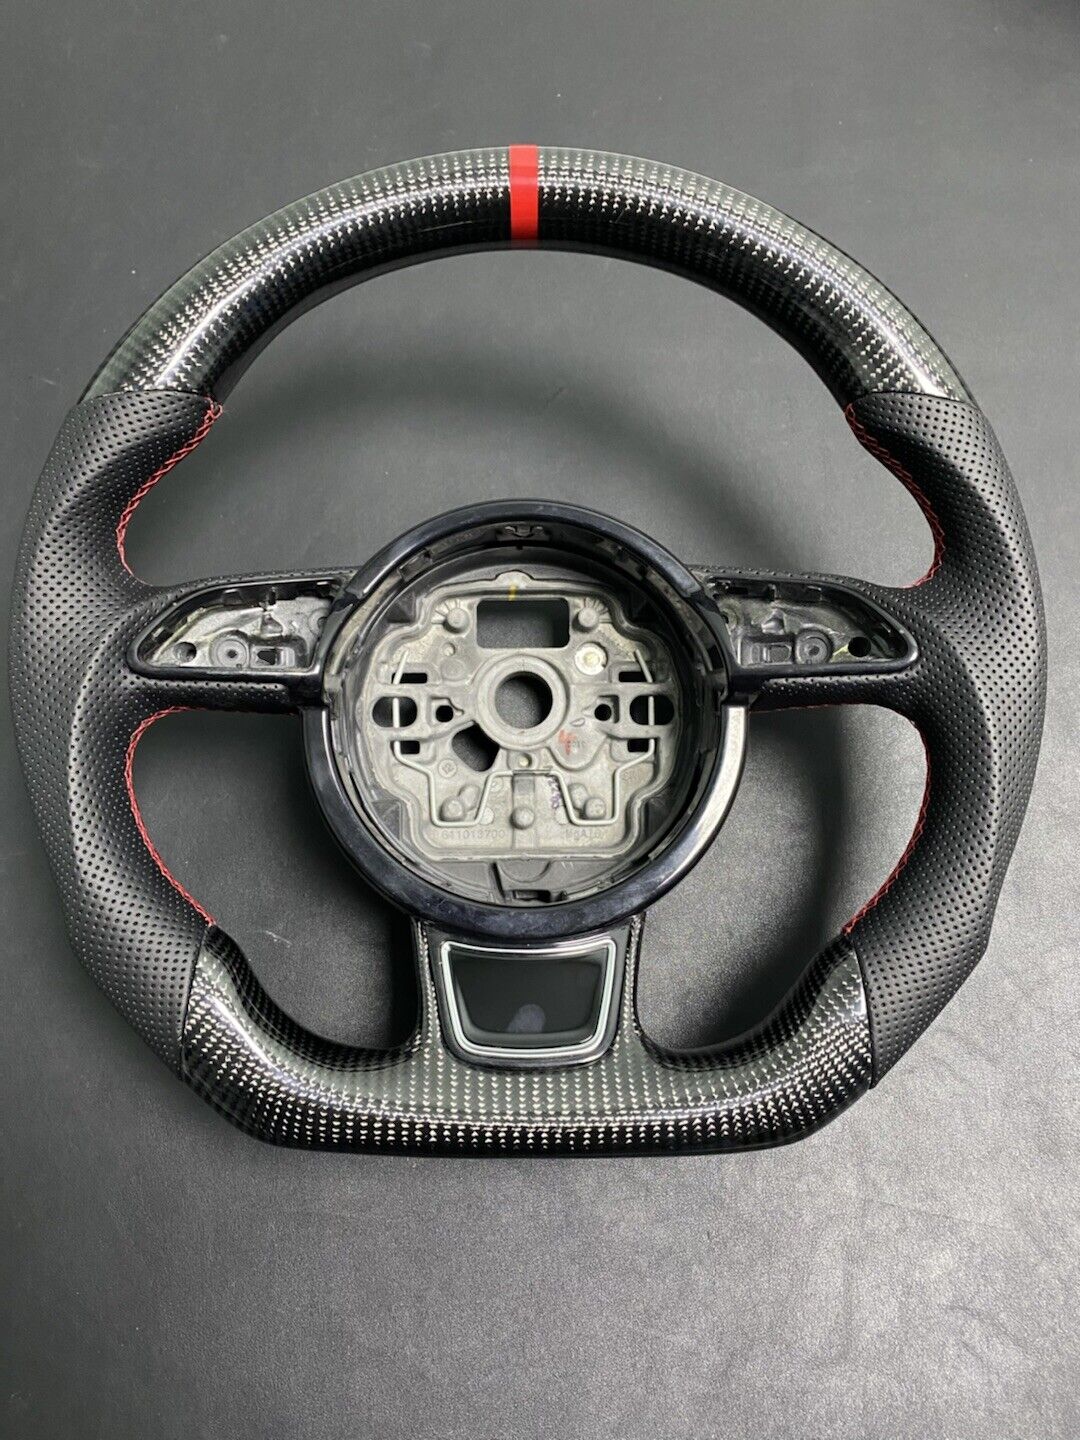 For AUDI A3 A4 A5 S3 S4 S5 RS3 RS4 13-16 Replace Carbon Fiber Steering Wheel 